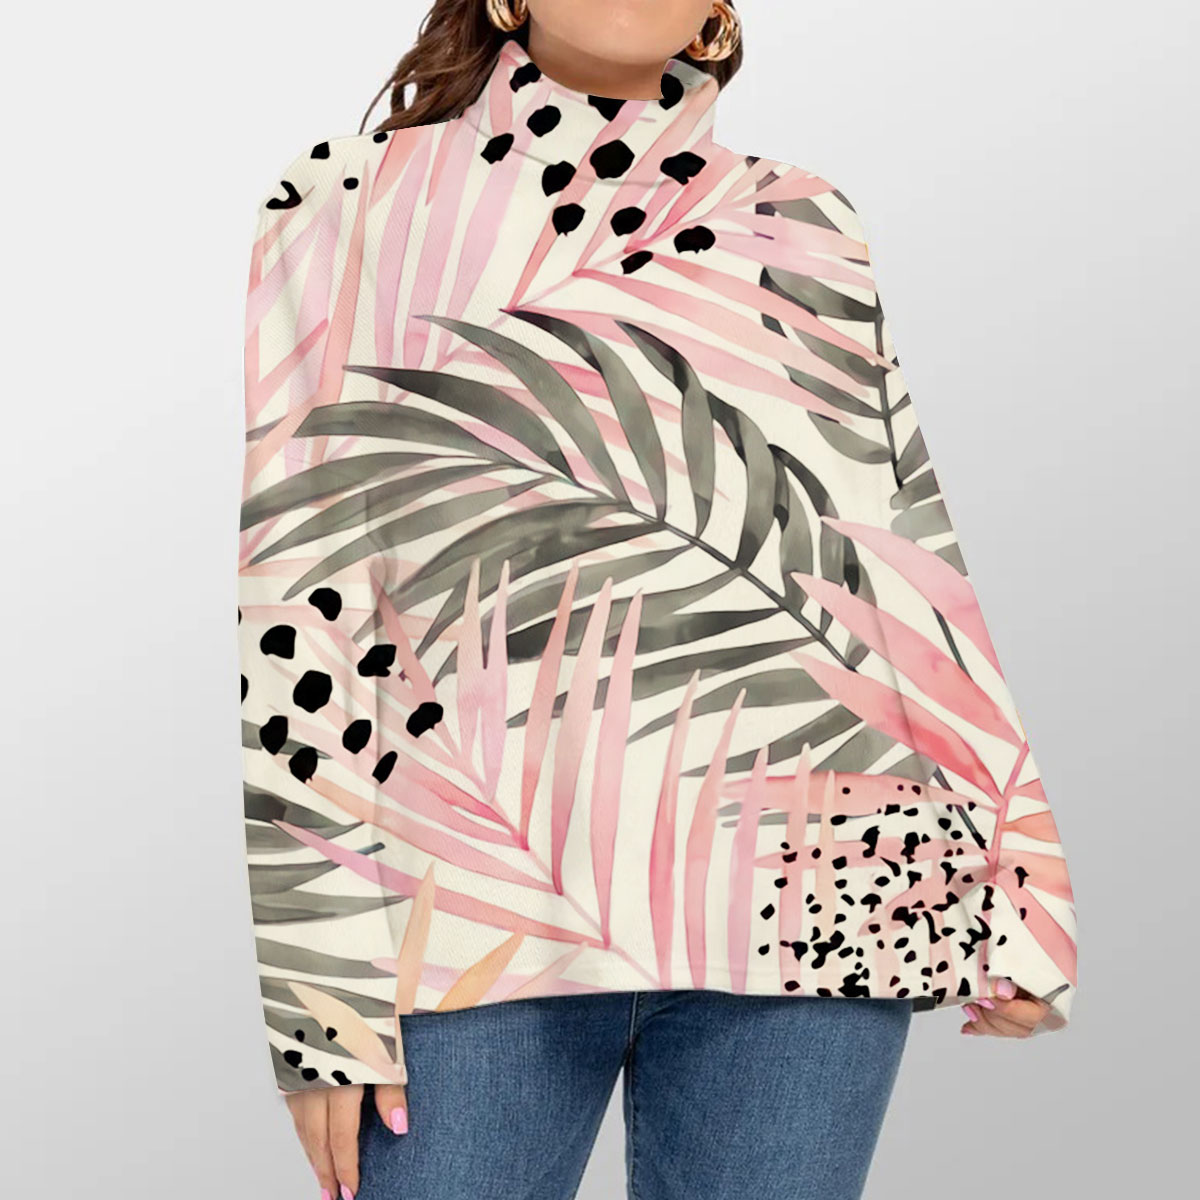 Watercolour Pink Colored and Graphic Palm Leaf Turtleneck Sweater